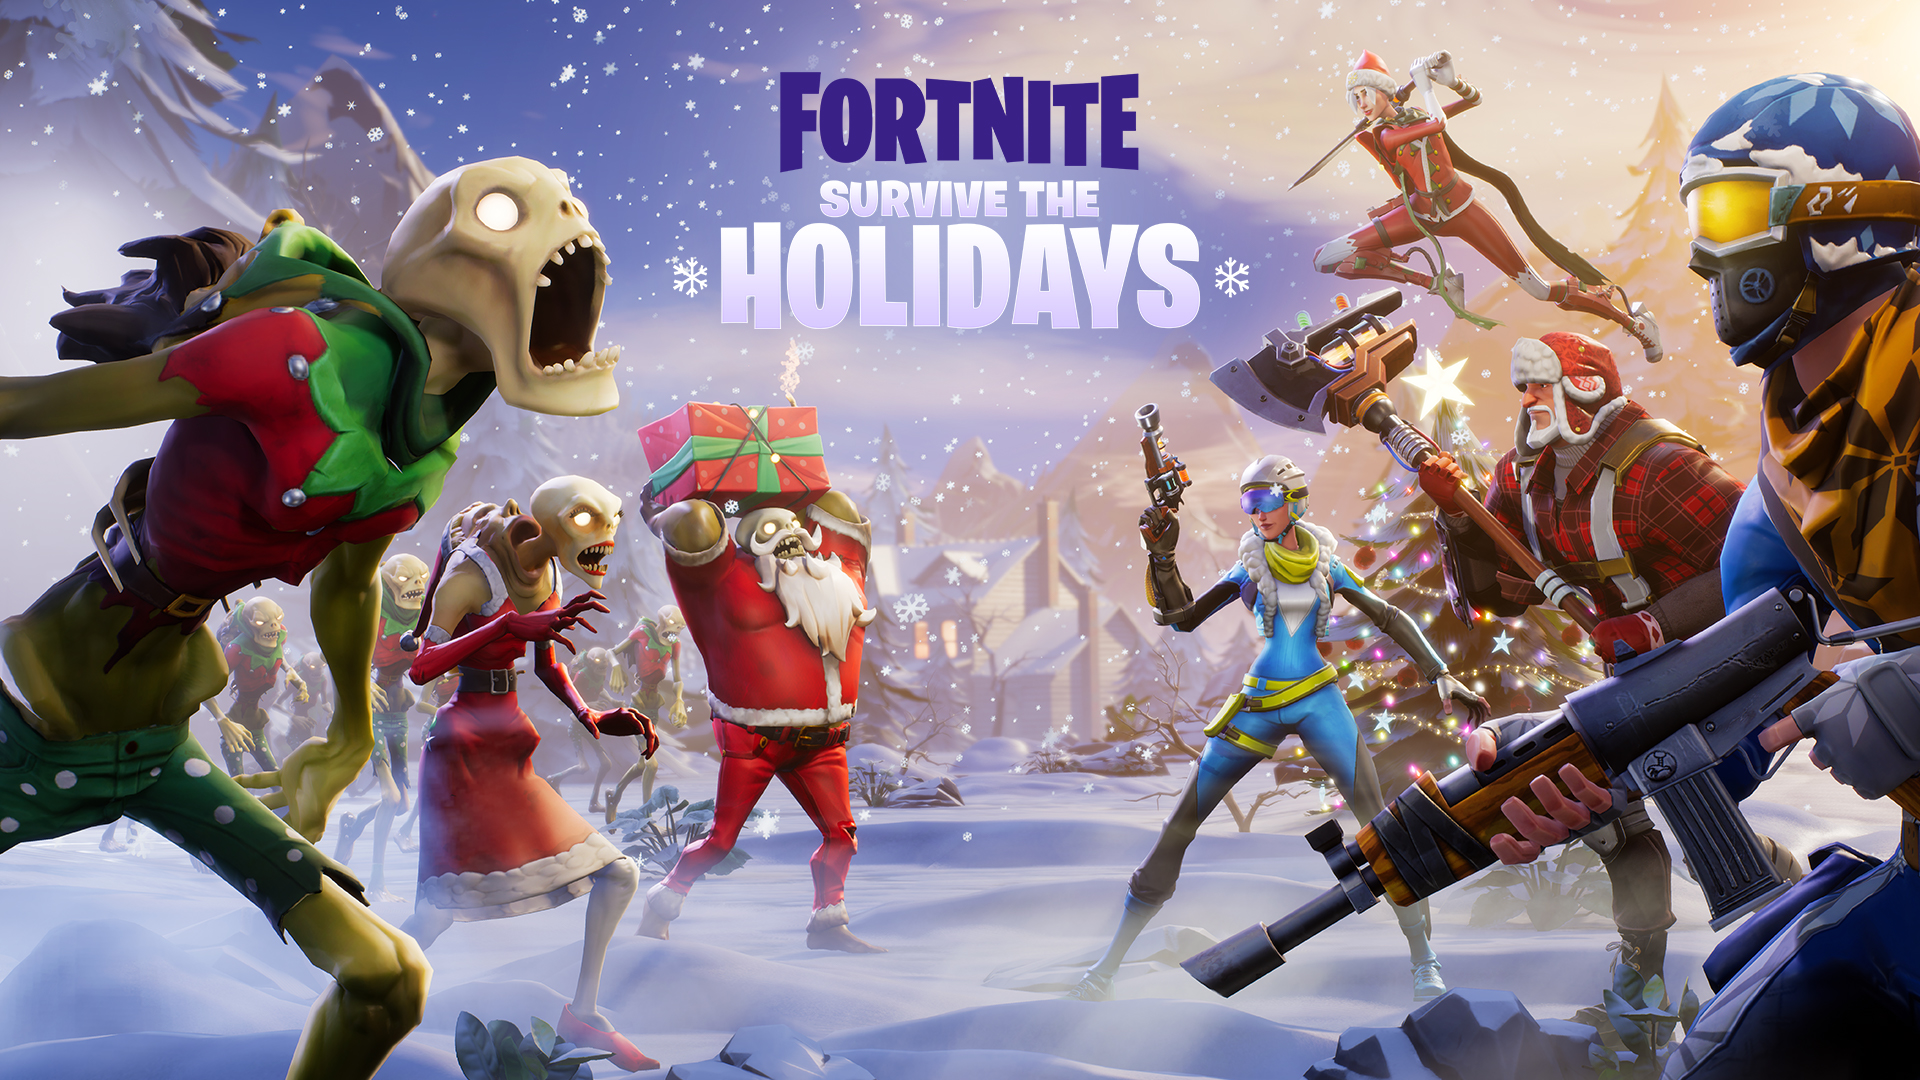 Fortnite Survive The Holidays